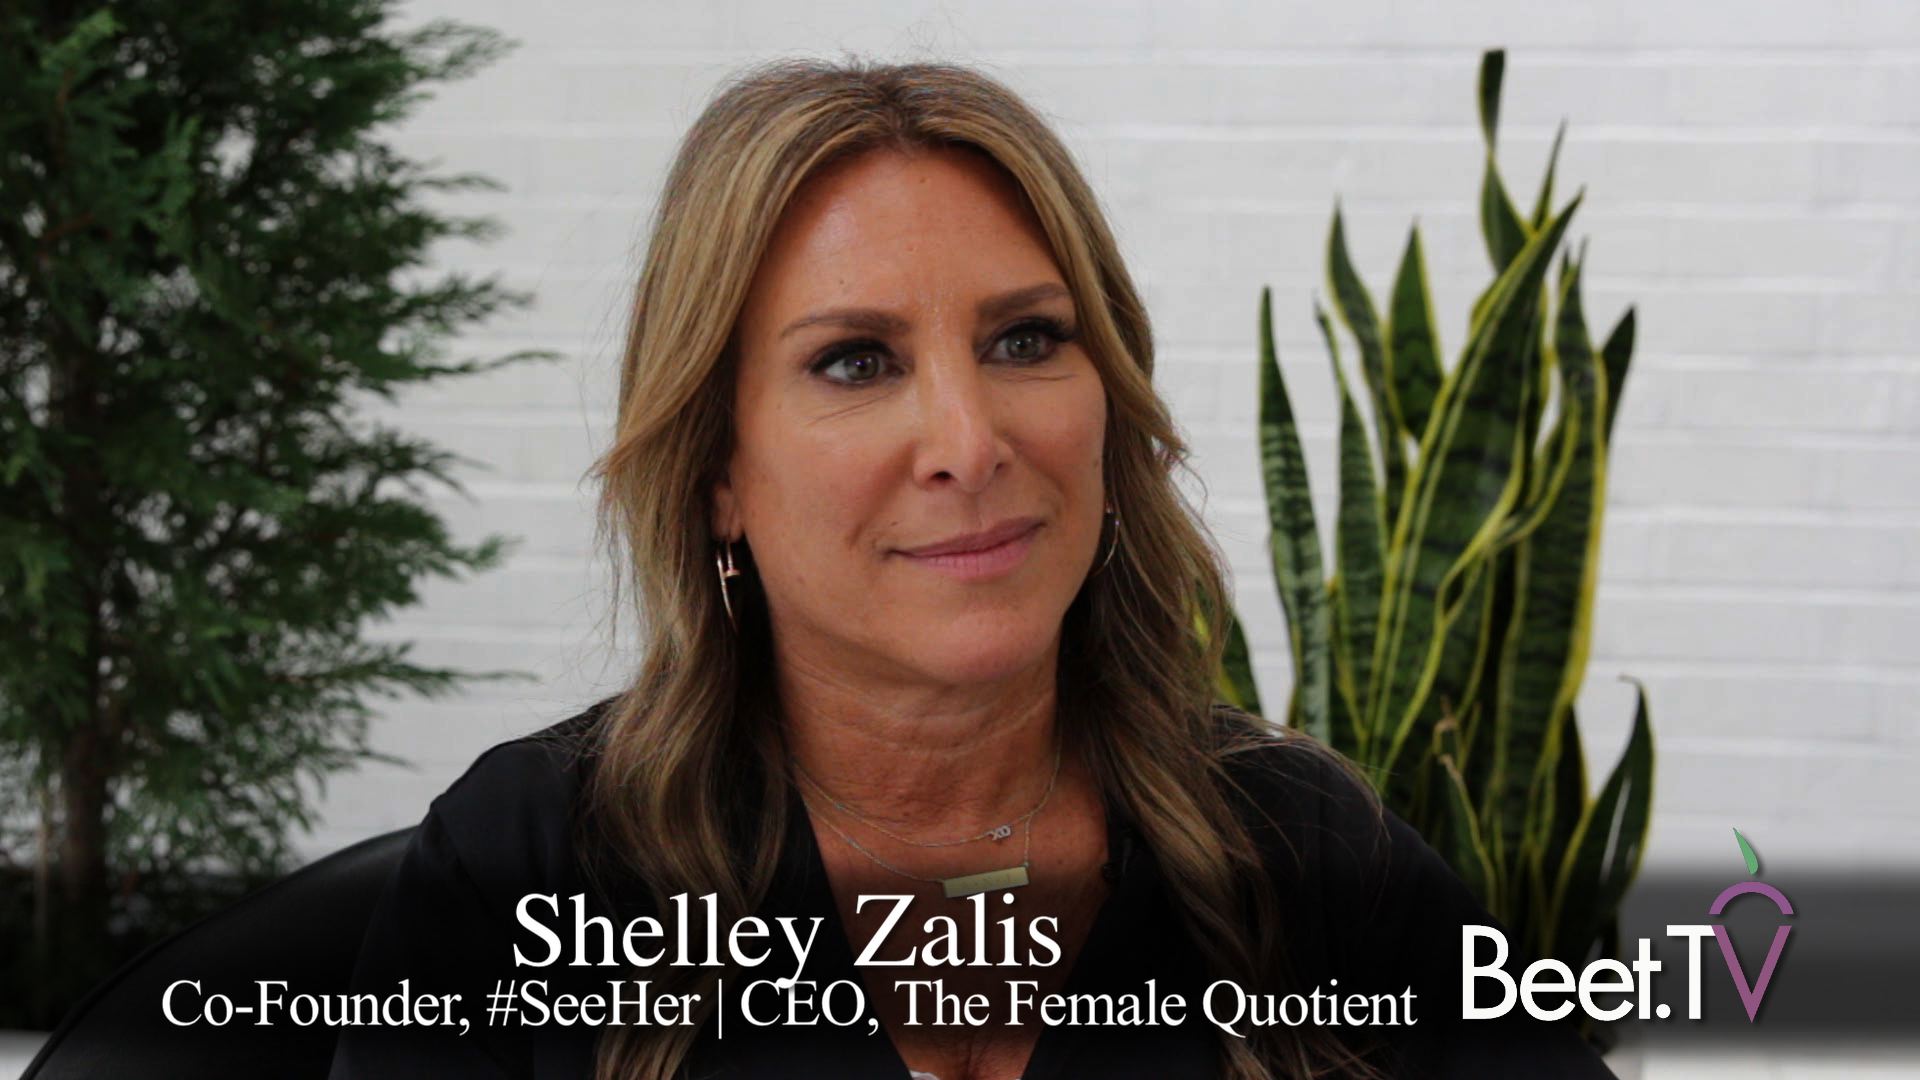 #SeeHer Co-Founder Zalis: Gender Equality Score Is New Industry Standard